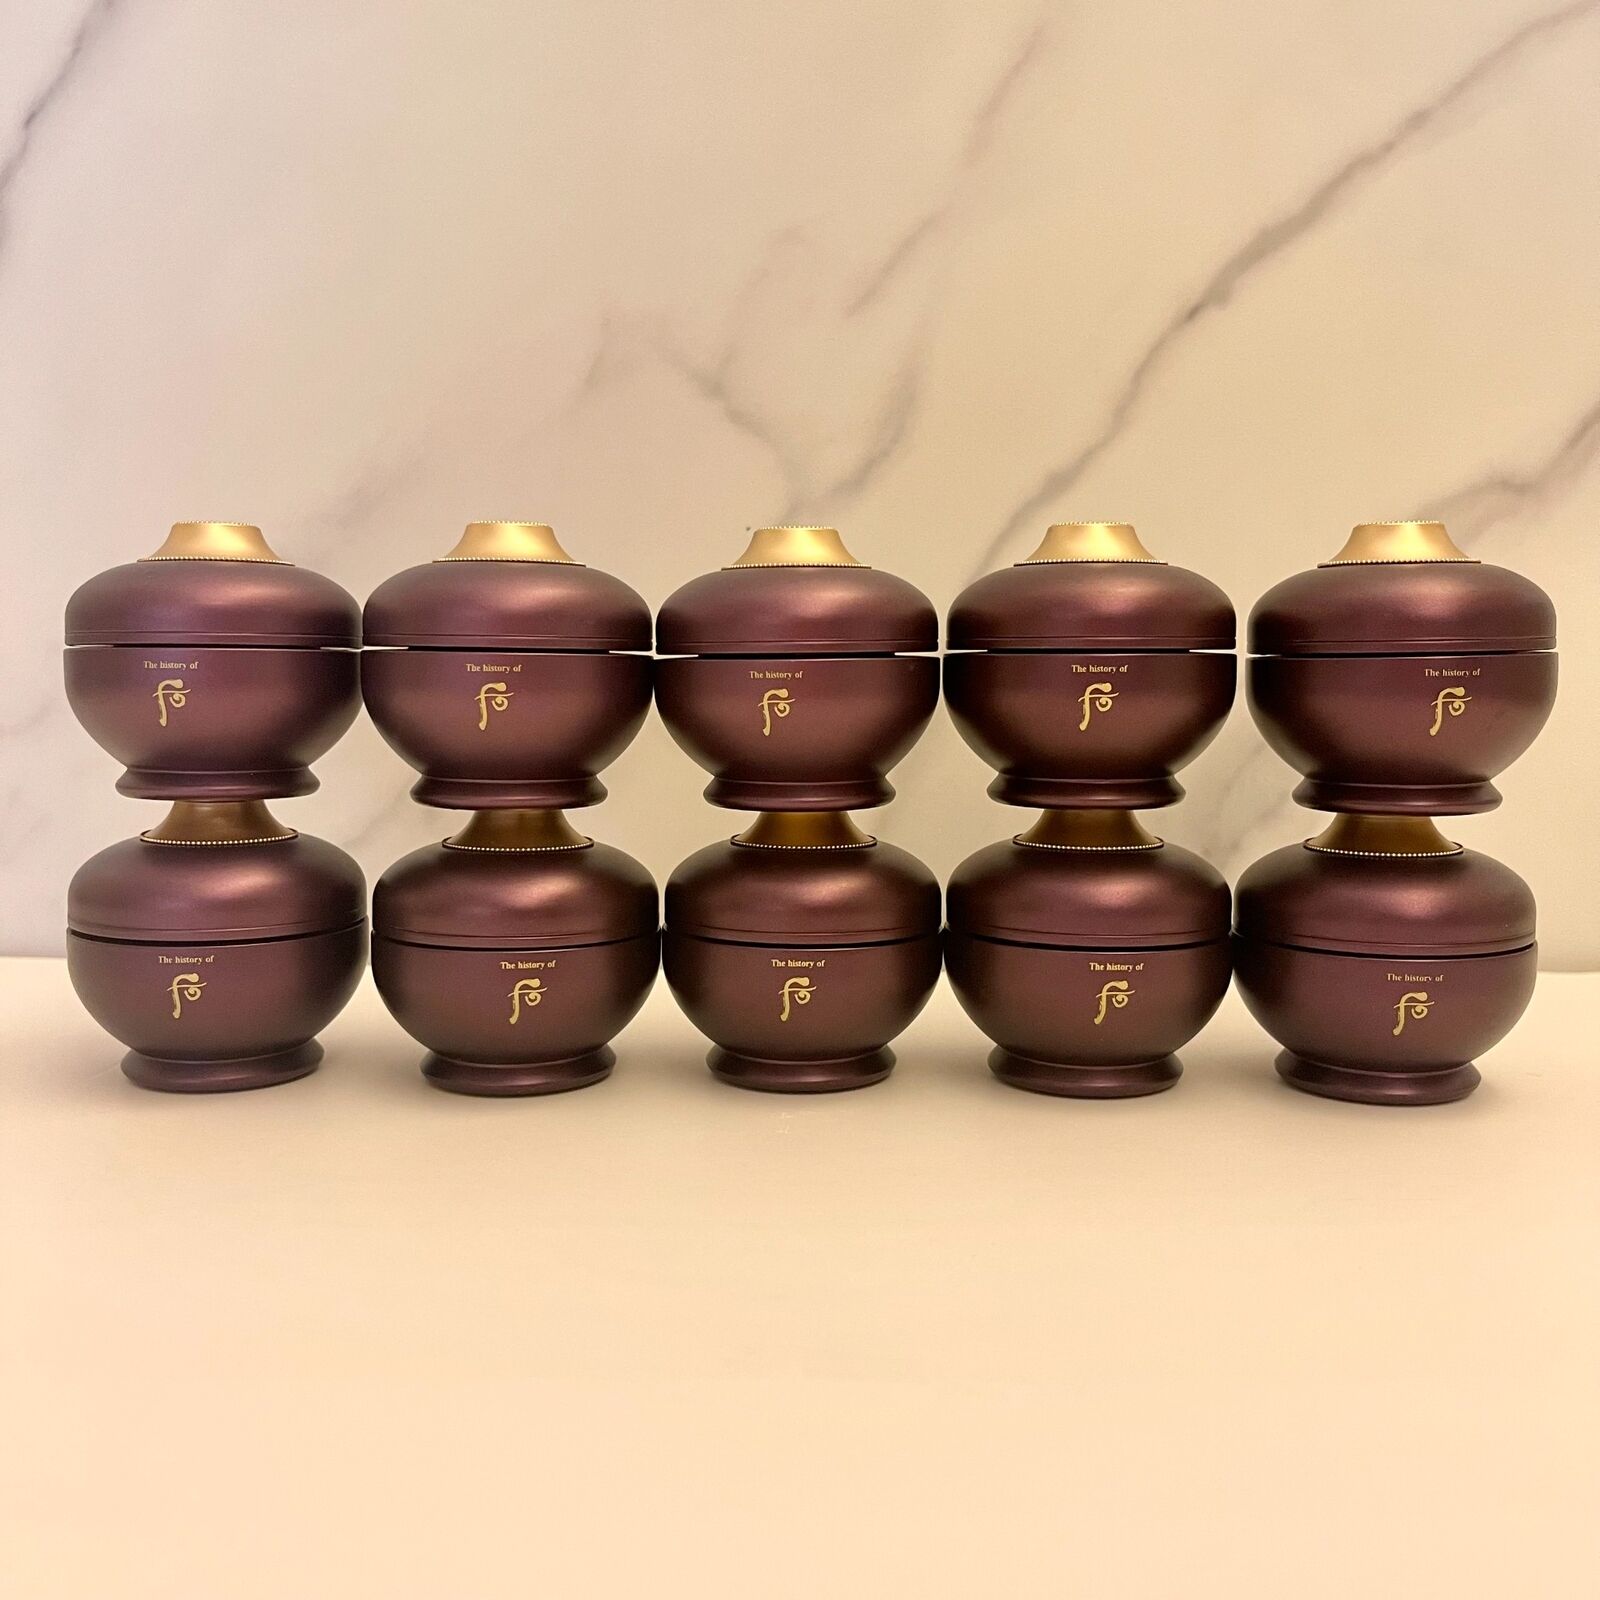 【10 Pcs】The History of Whoo Hwanyu Imperial Youth Cream 4mlx10=40ml NEW SEALED